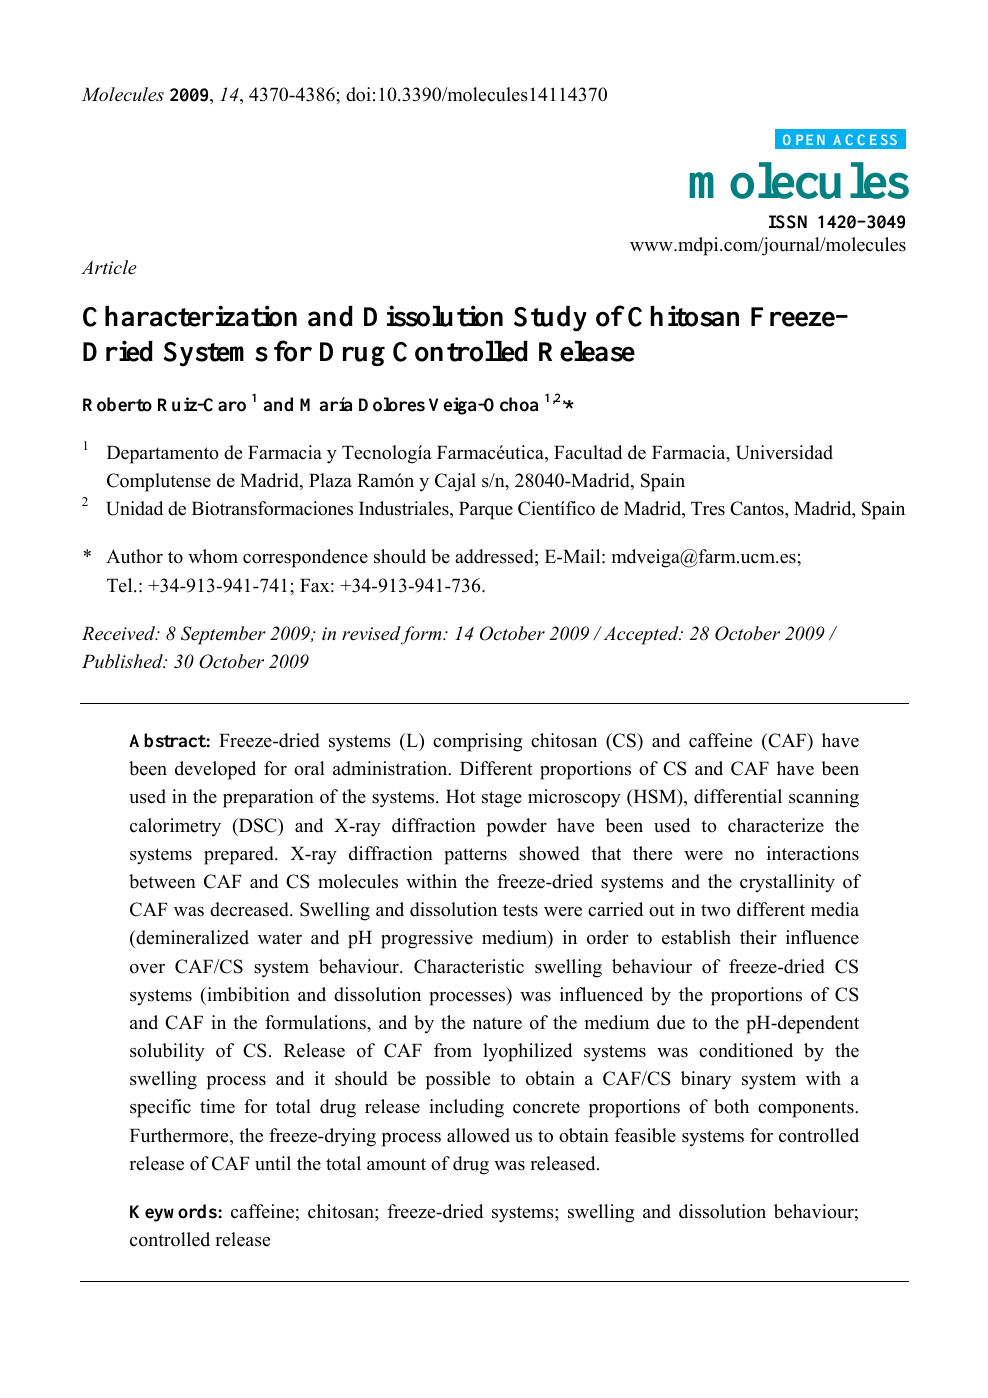 Characterization And Dissolution Study Of Chitosan Freeze Dried Systems For Drug Controlled Release Topic Of Research Paper In Nano Technology Download Scholarly Article Pdf And Read For Free On Cyberleninka Open Science Hub